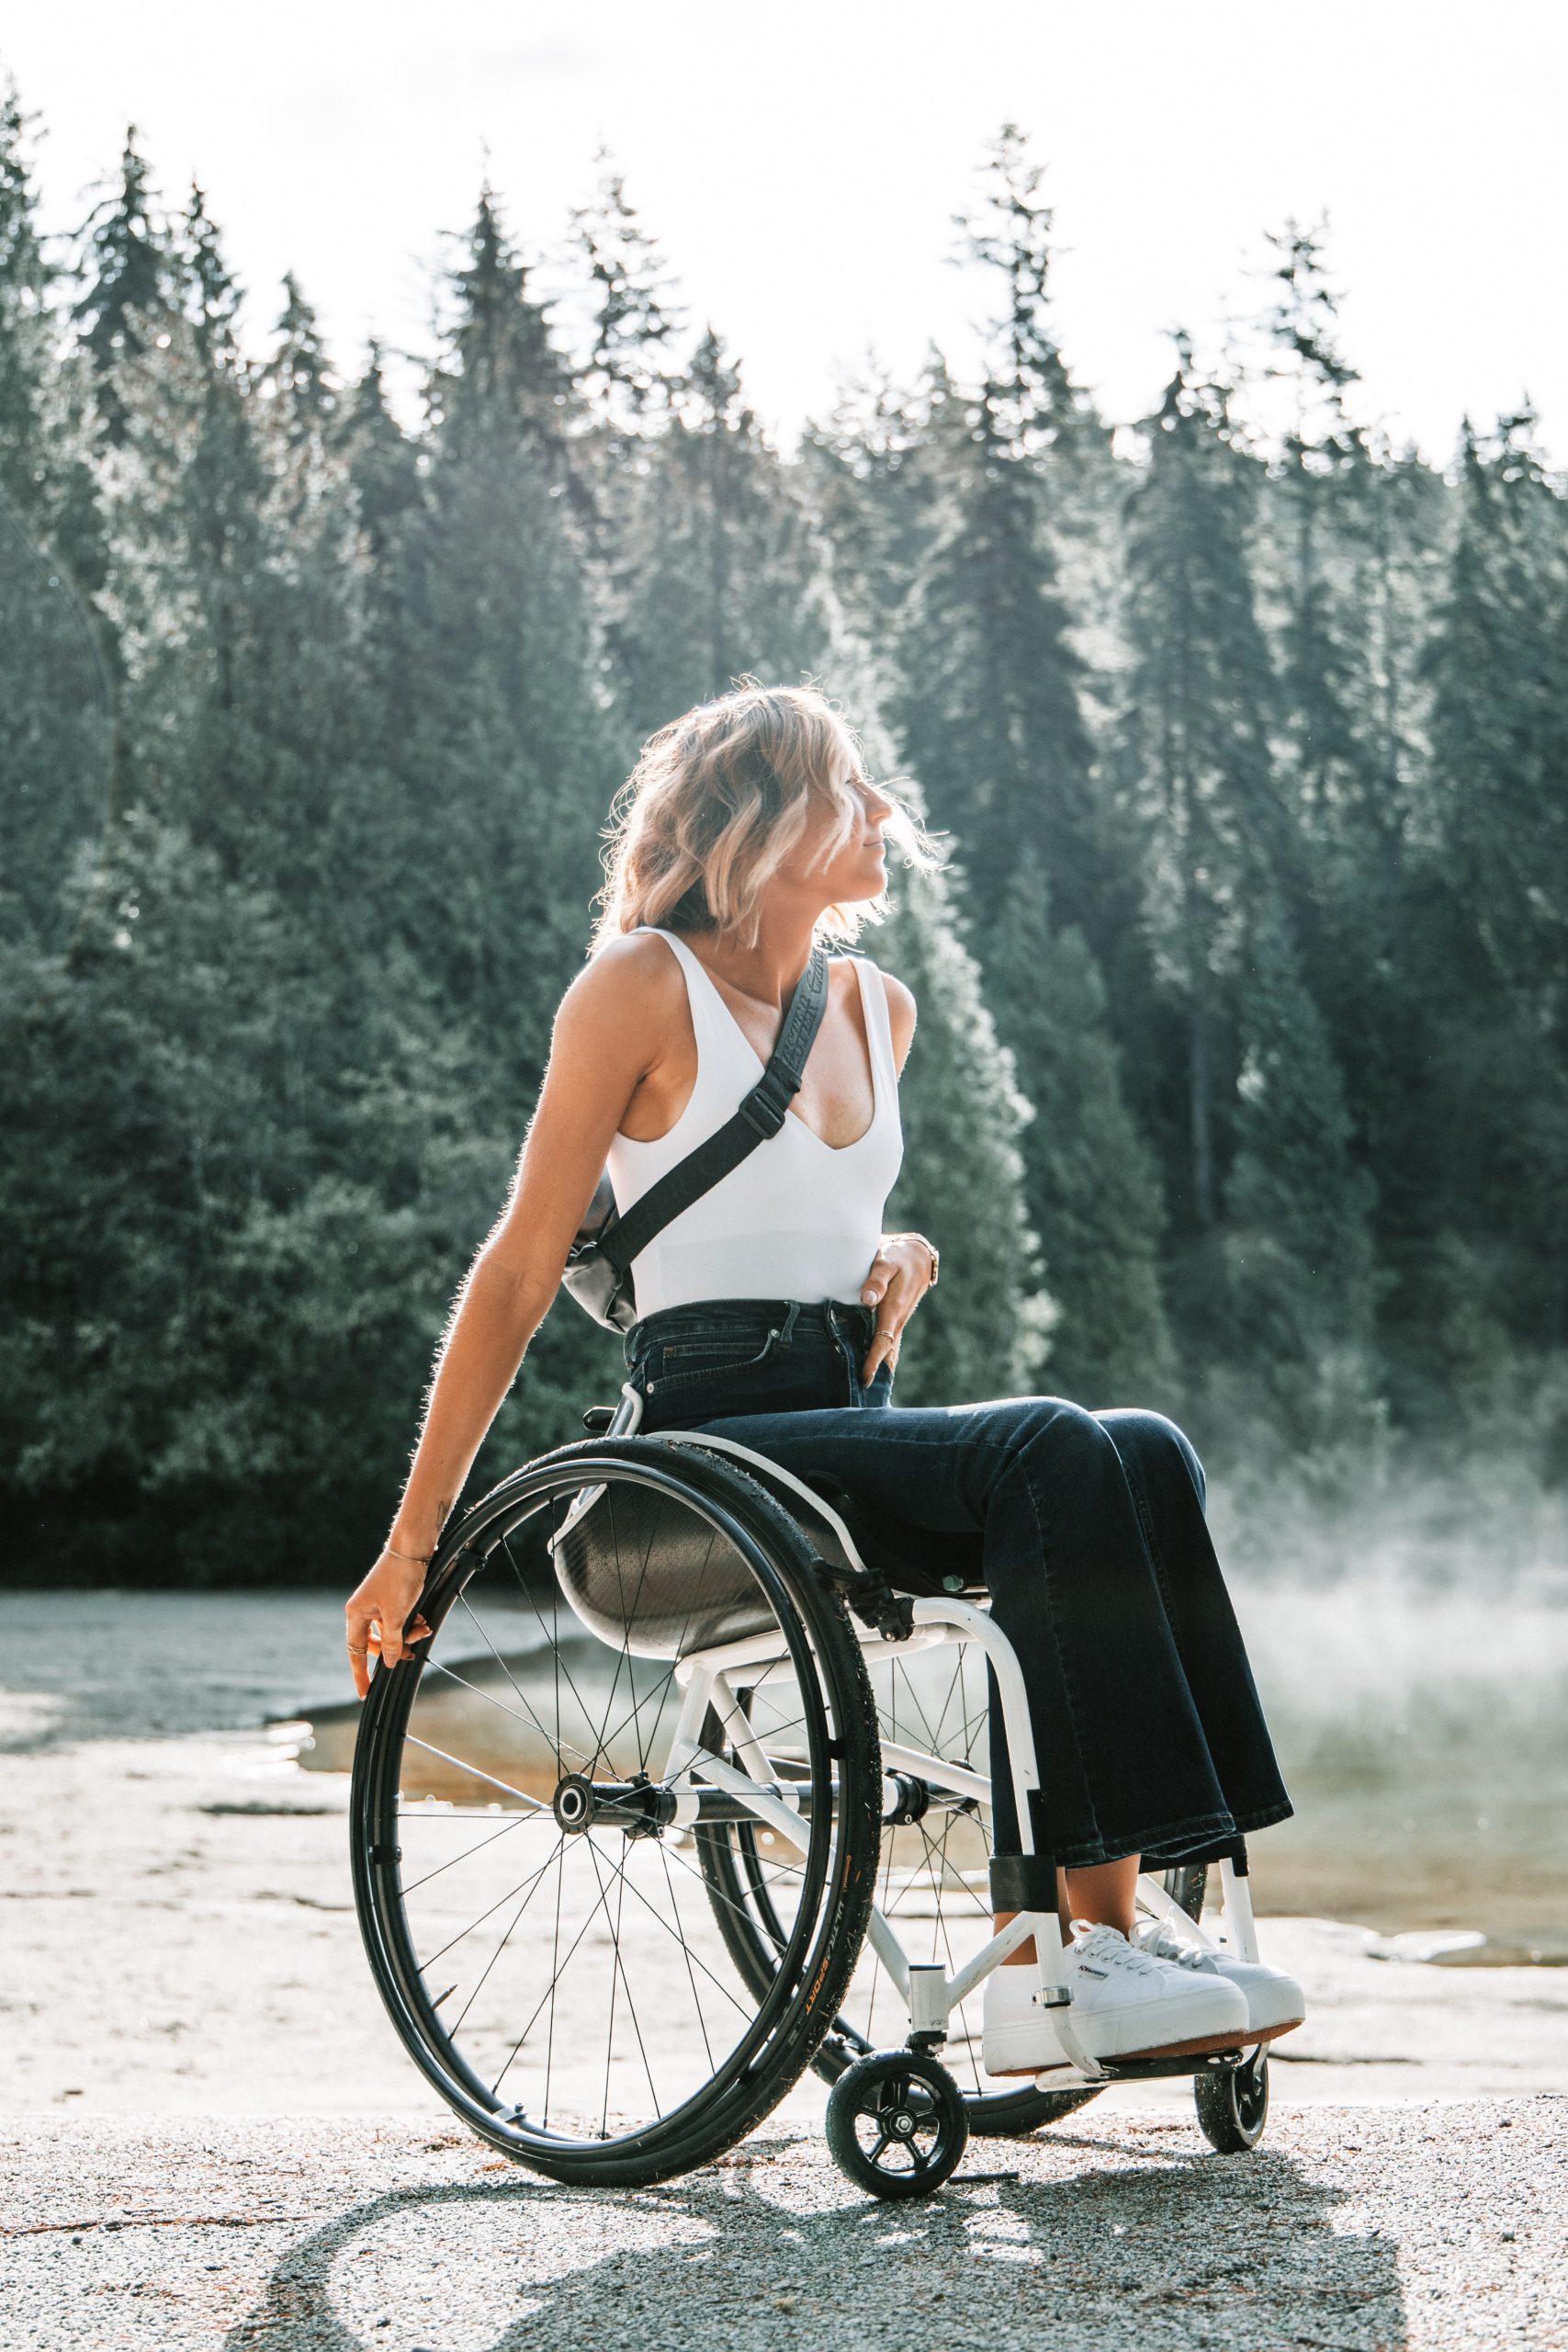 Adaptive clothing makes getting dressed easier for the disabled